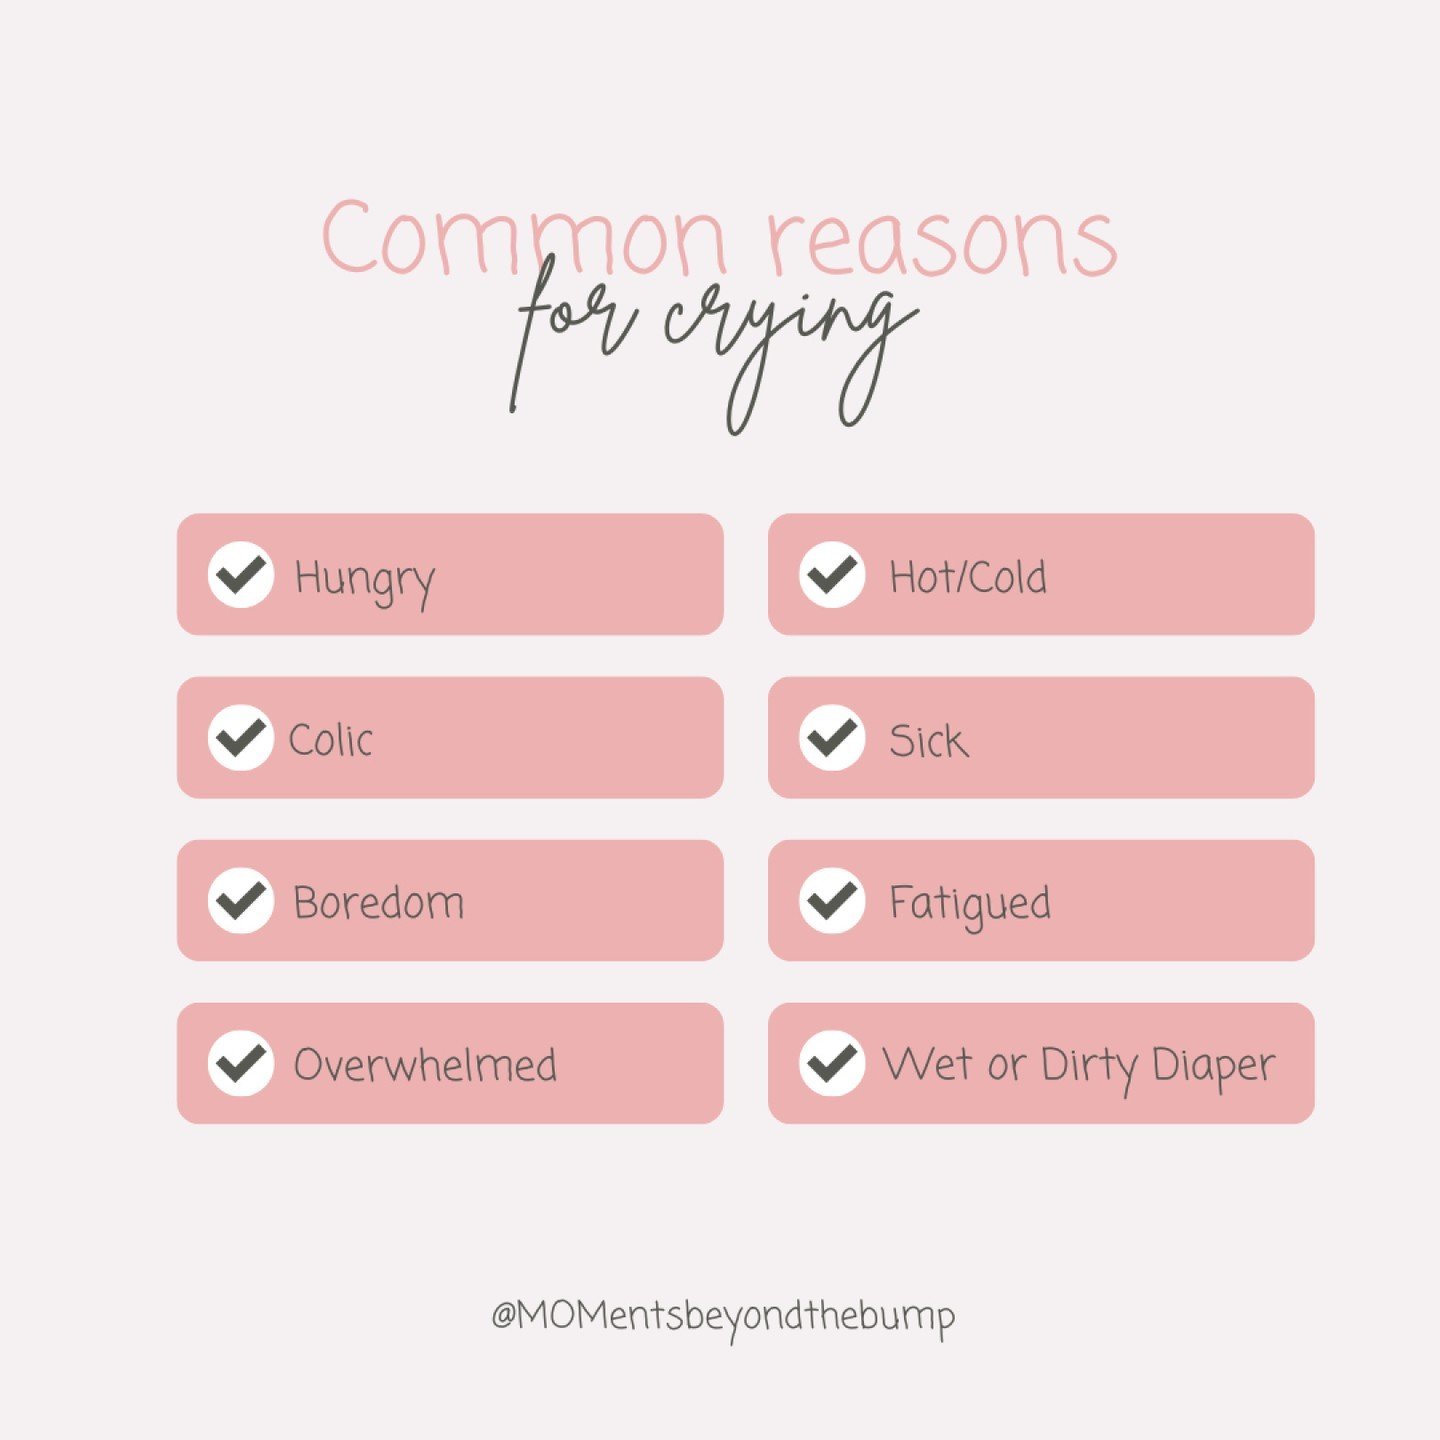 Incase you didn't know... All babies cry, and some more than others. Crying is your baby's way of telling you they need comfort and care.

Sometimes it's easy to work out what they want, and sometimes it's not. 😣

There may be times of the day when 